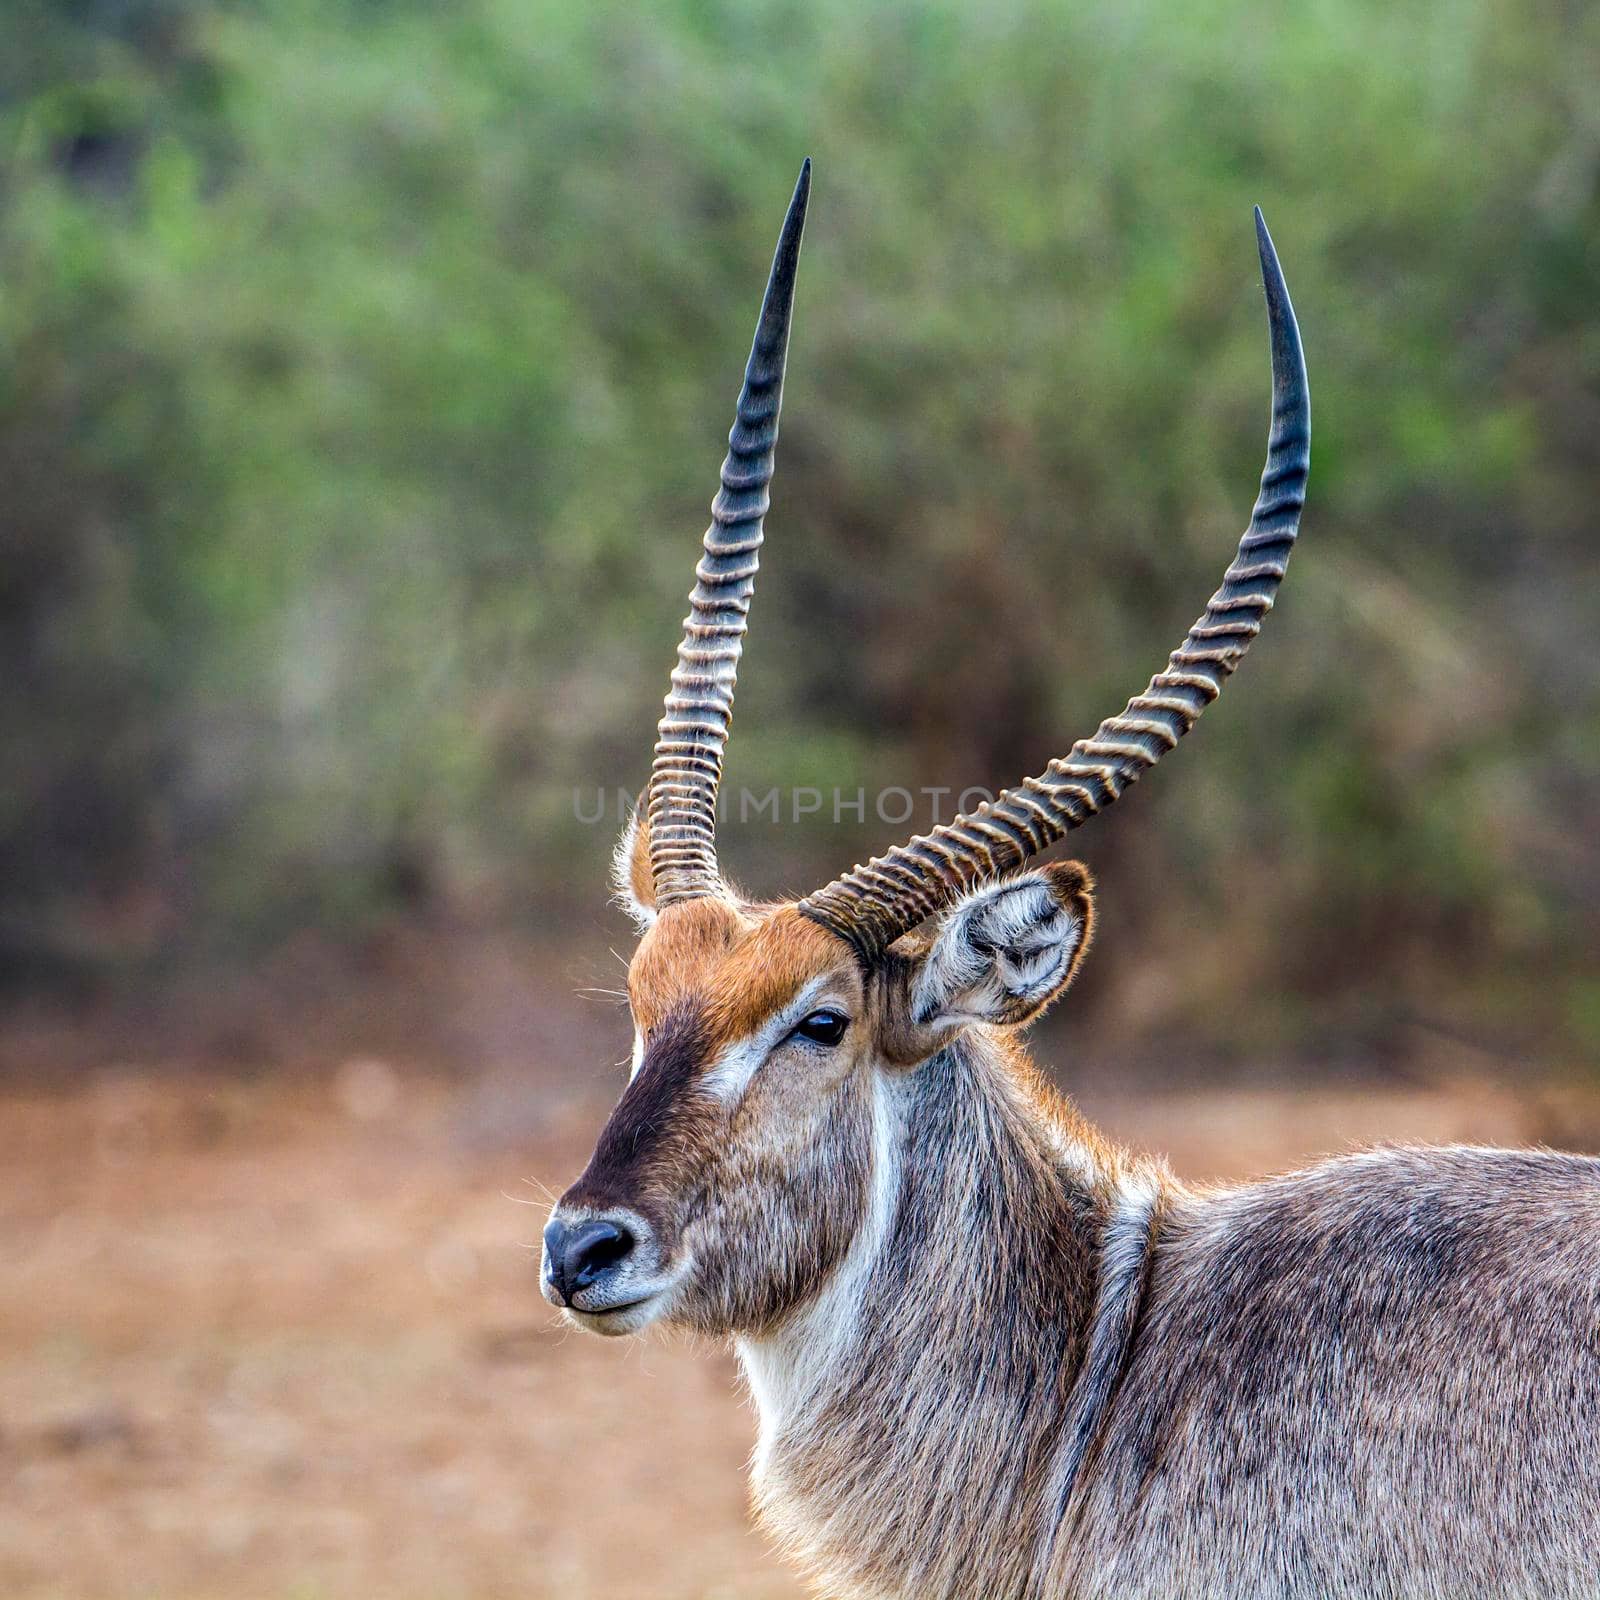 Waterbuck in Kruger National park, South Africa by PACOCOMO